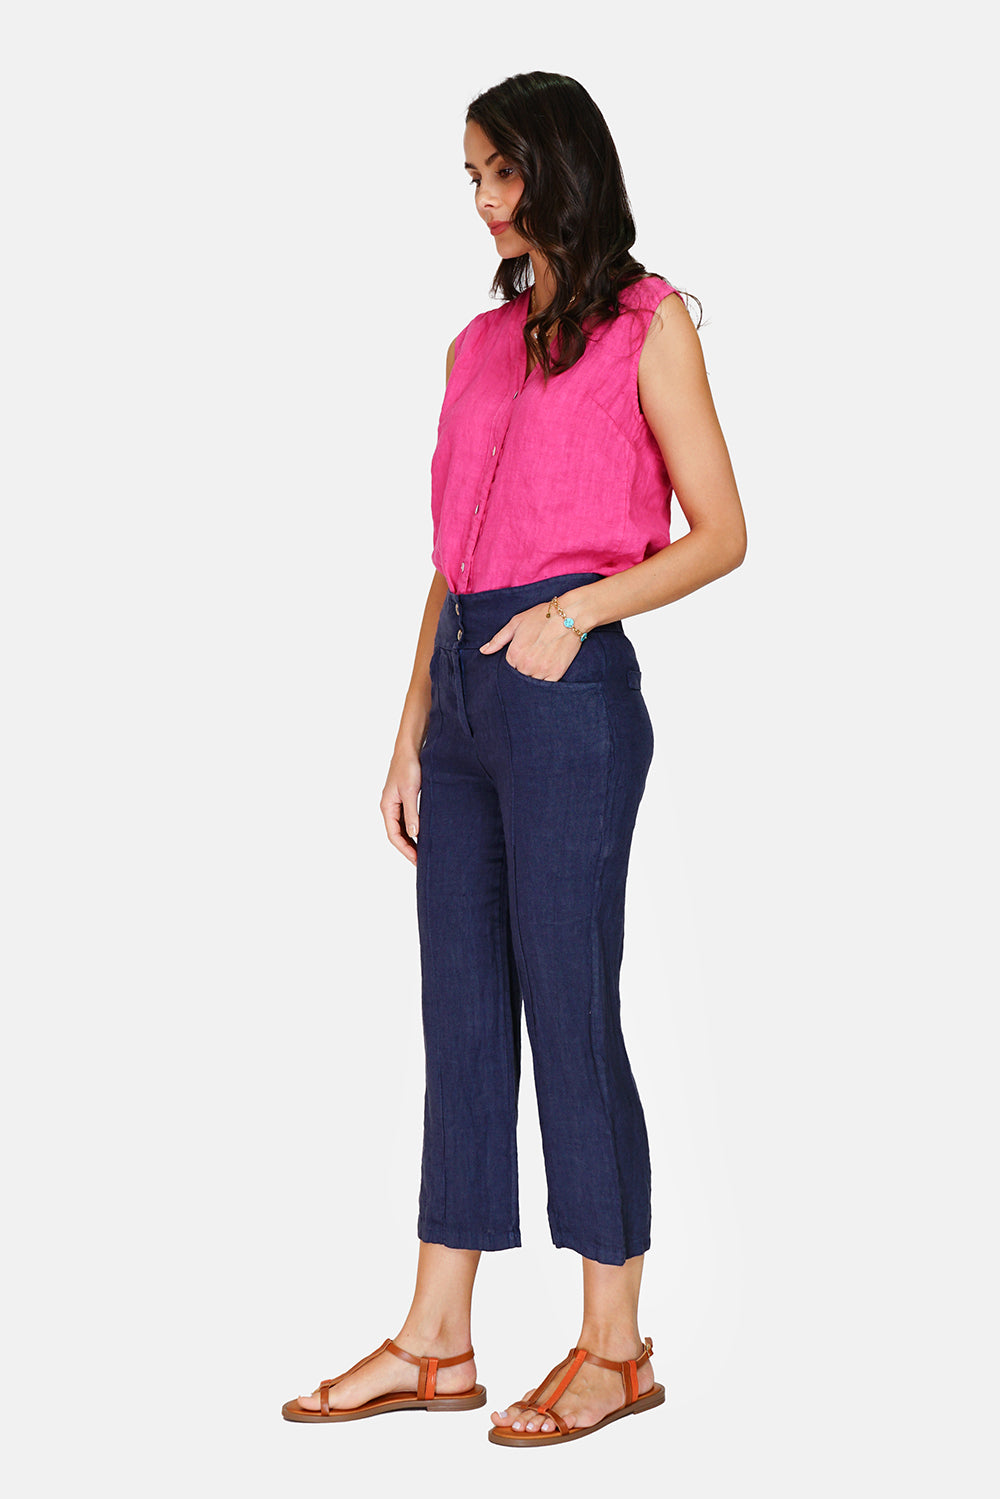 Dressy cropped trousers with zip closure and front pockets